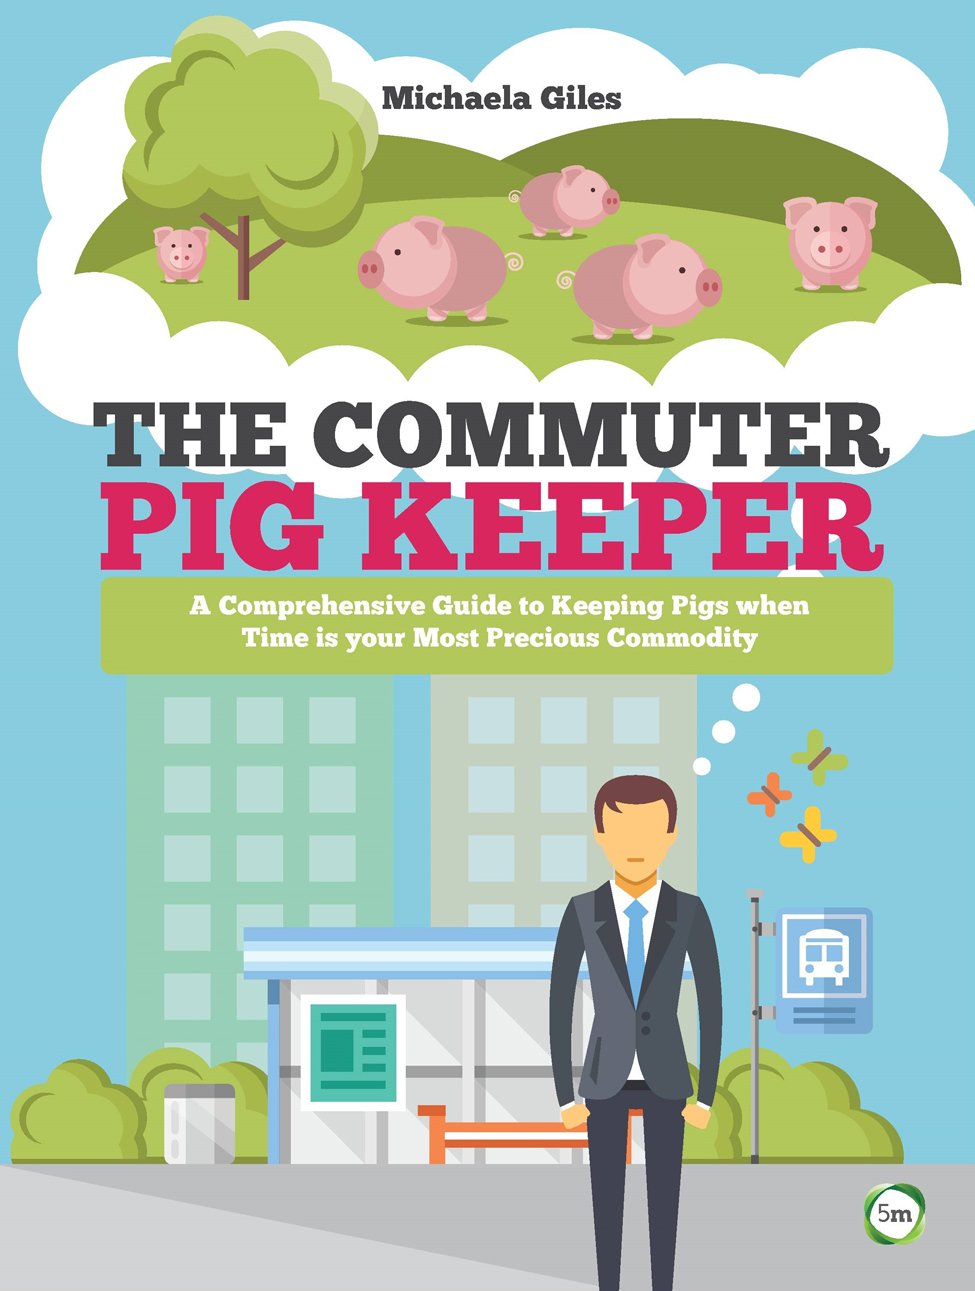 'The Commuter Pig Keeper' by Michaela Giles